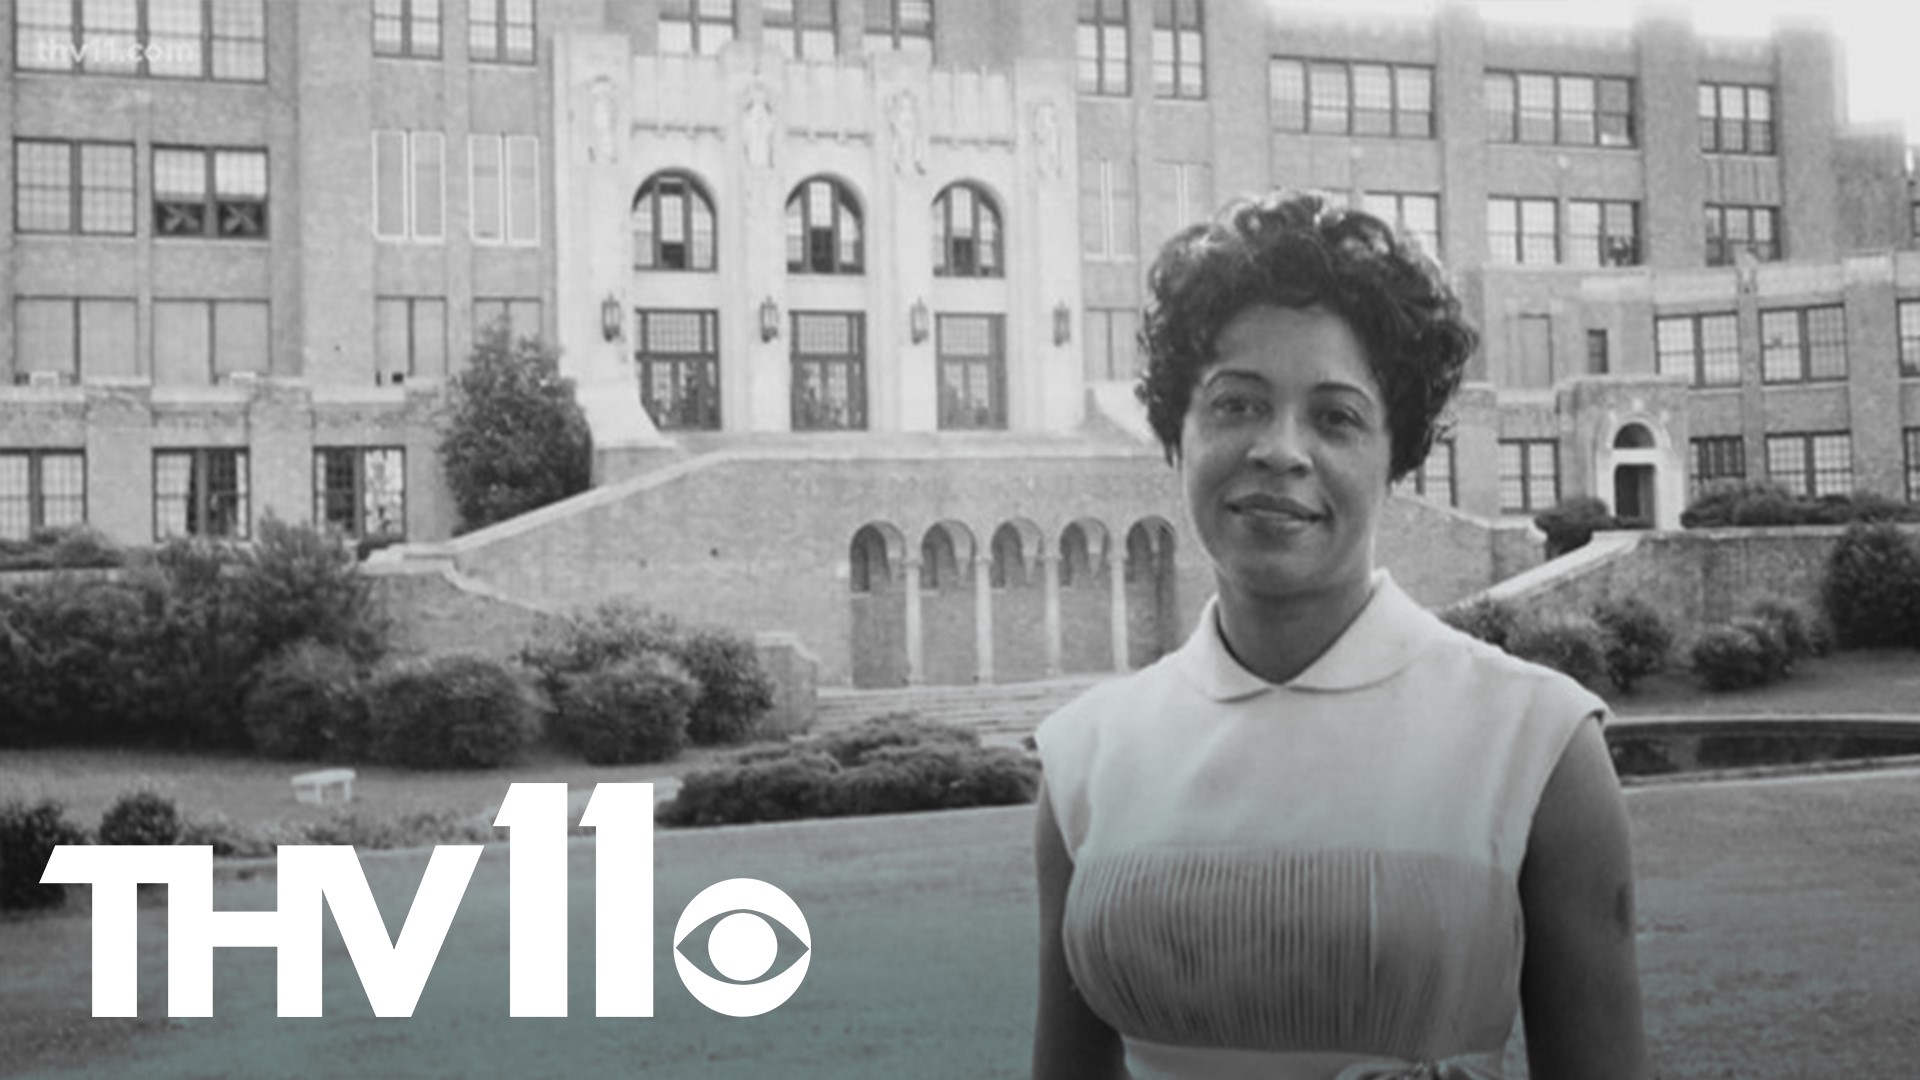 As an integral part of our American history here in Arkansas, people are celebrating Daisy Gatson Bates, a civil rights pioneer.